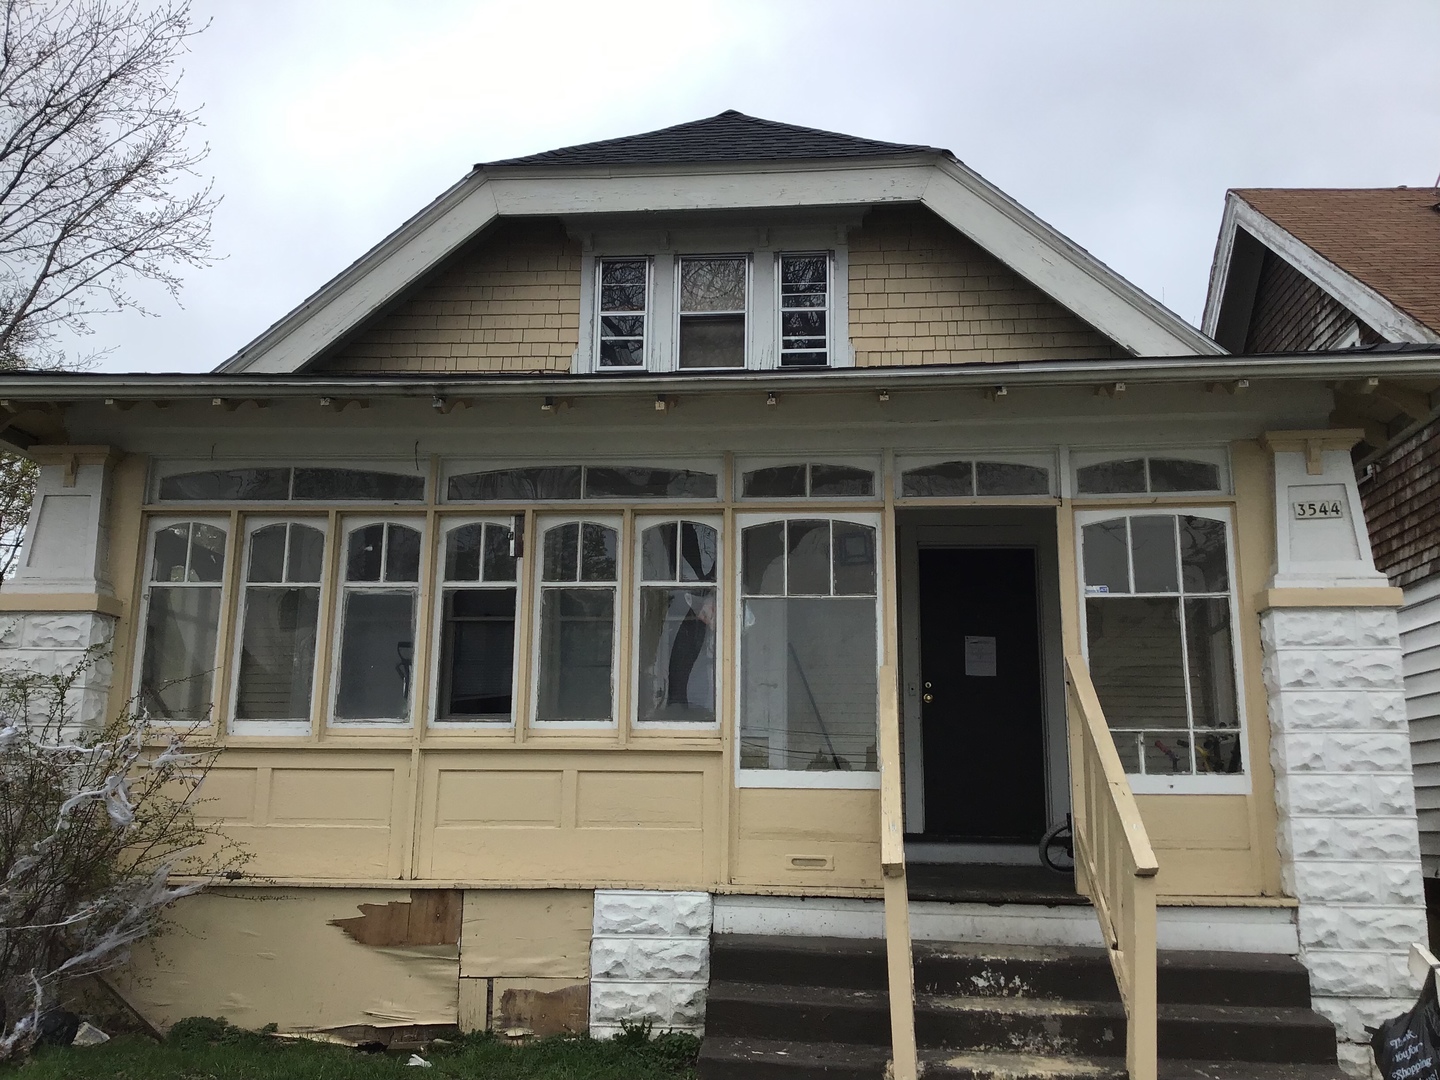 3 bedroom 1.5 bathroom single family home with off street parking